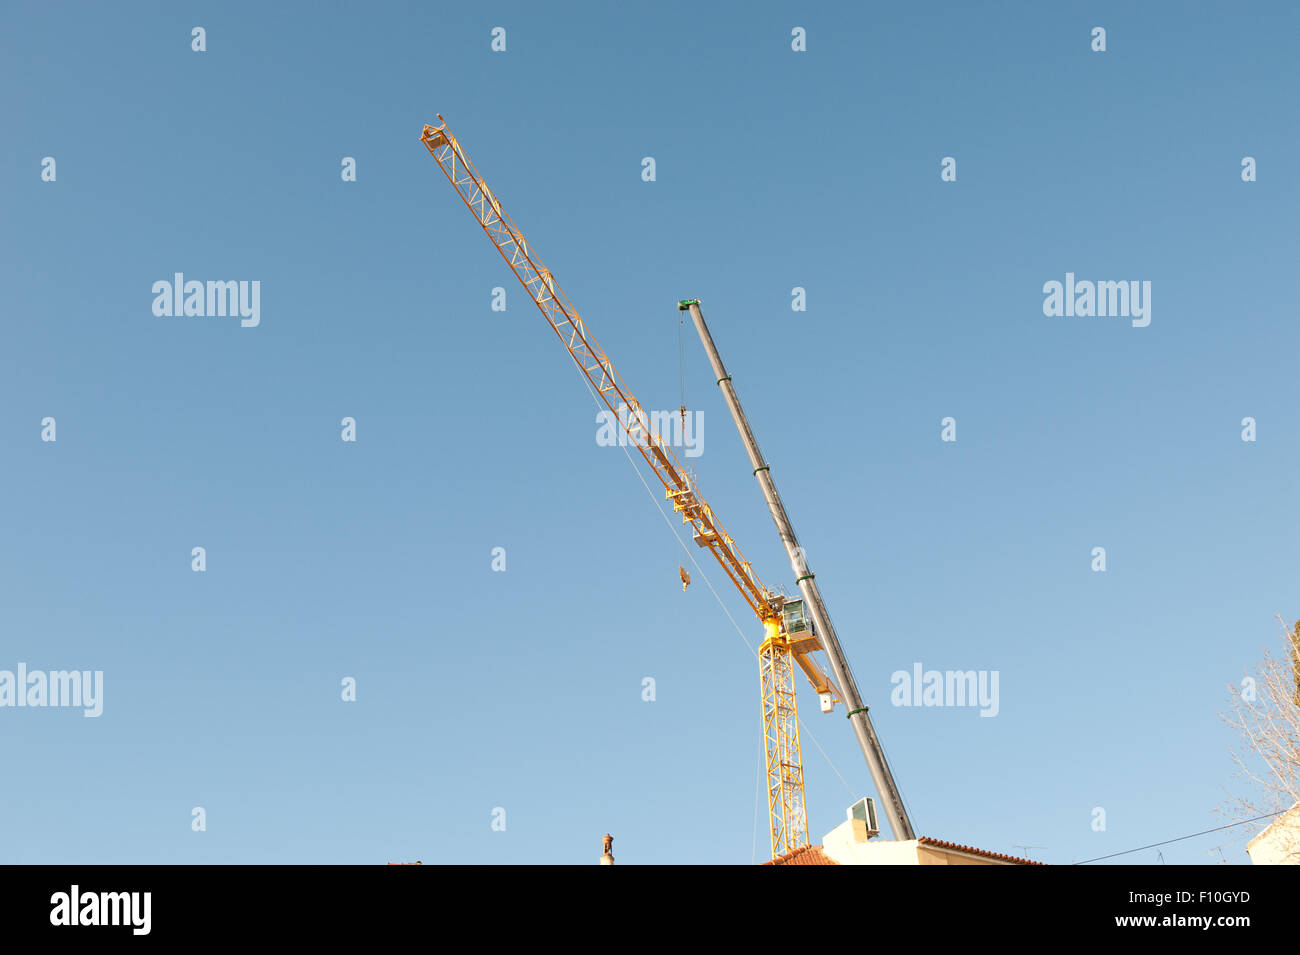 Silhouettes of construction cranes on the sky Stock Photo